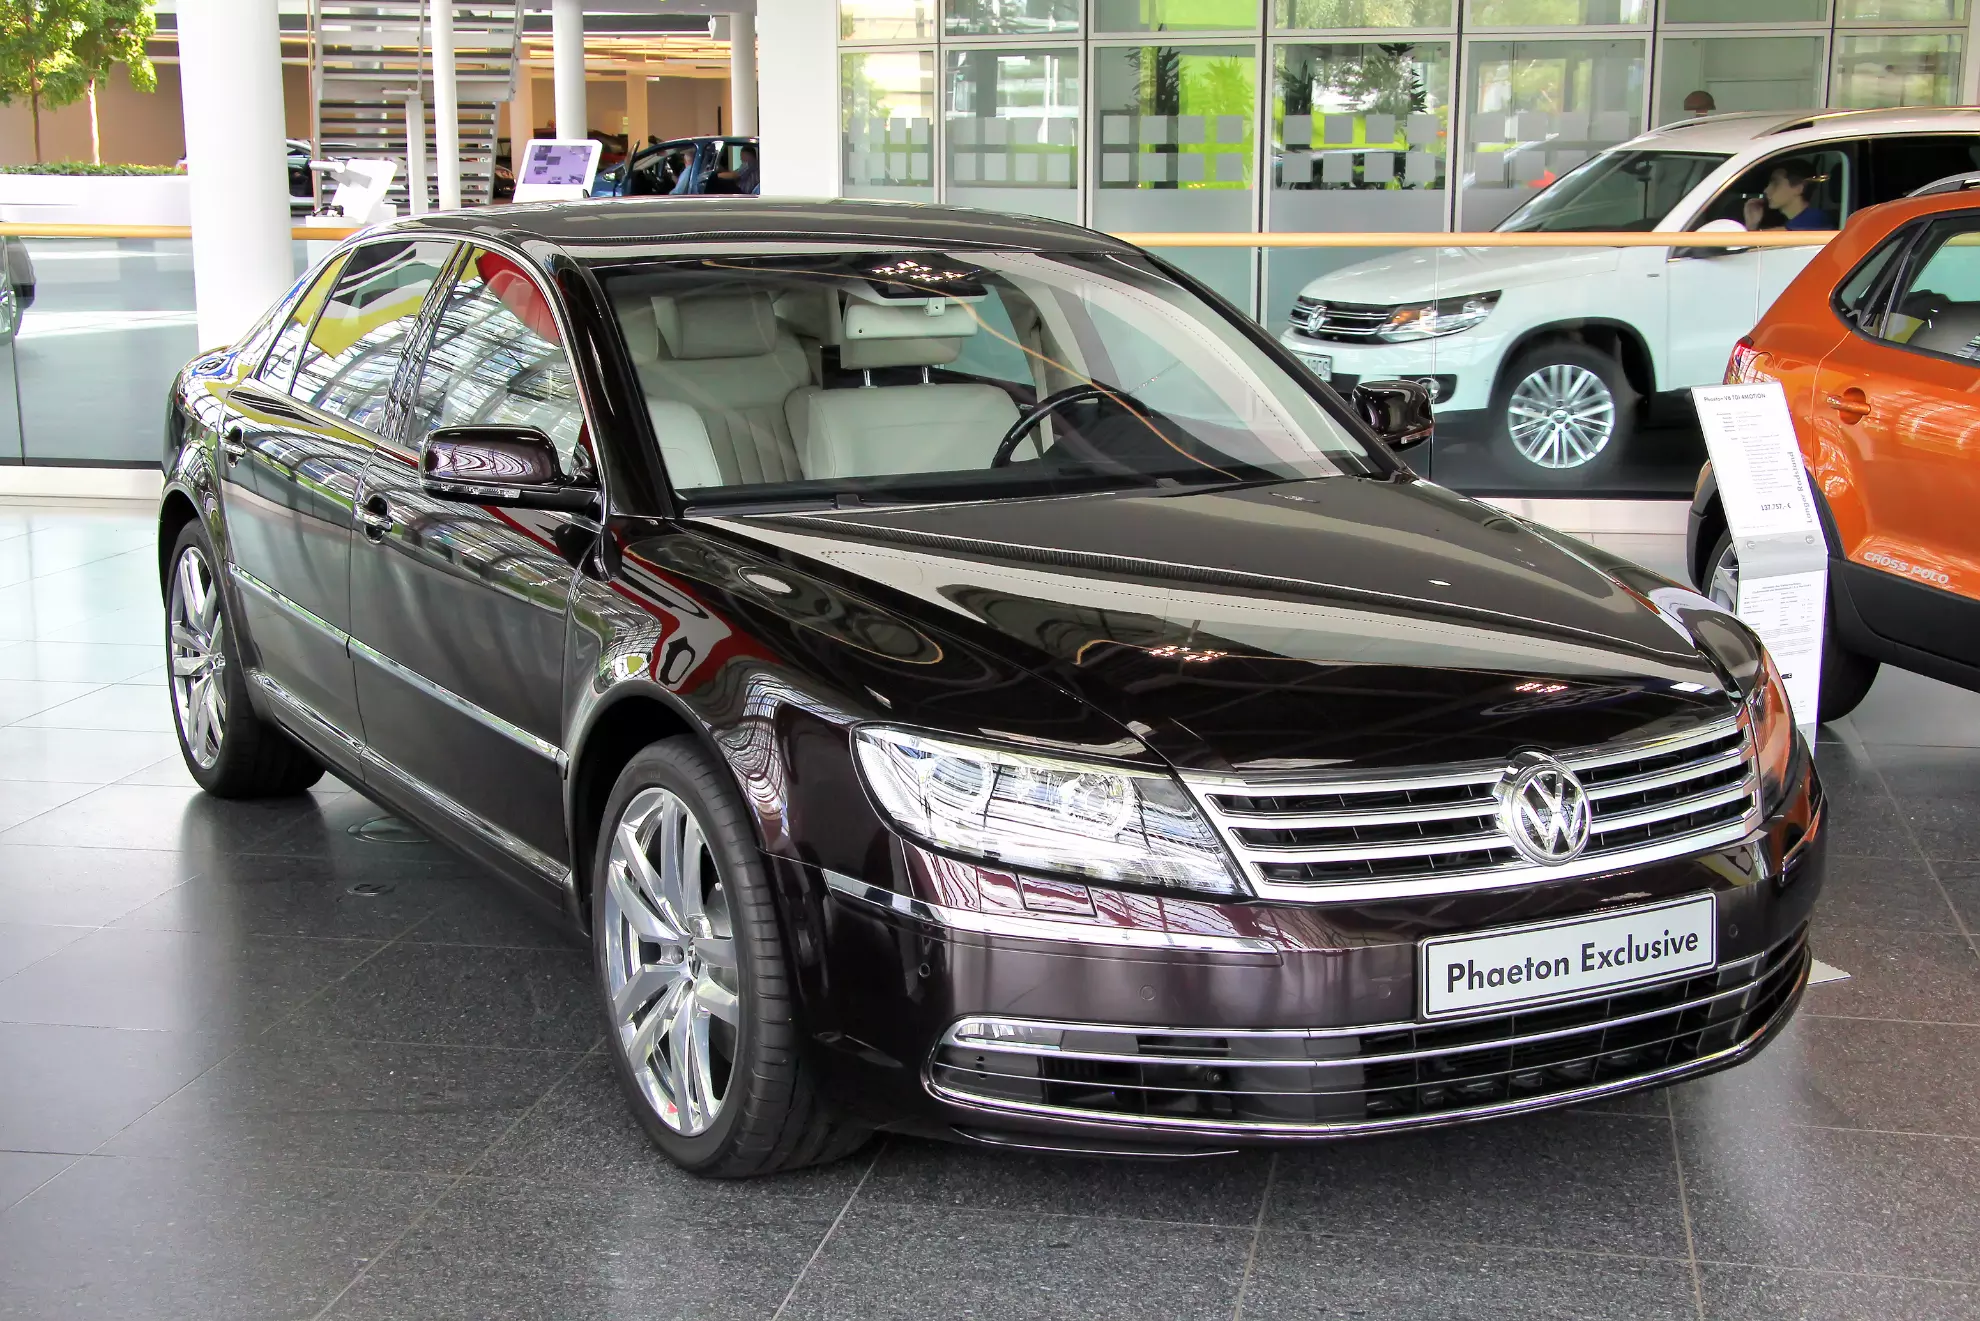 Volkswagen Phaeton: What are the best-used luxury cars to buy? Hampshire